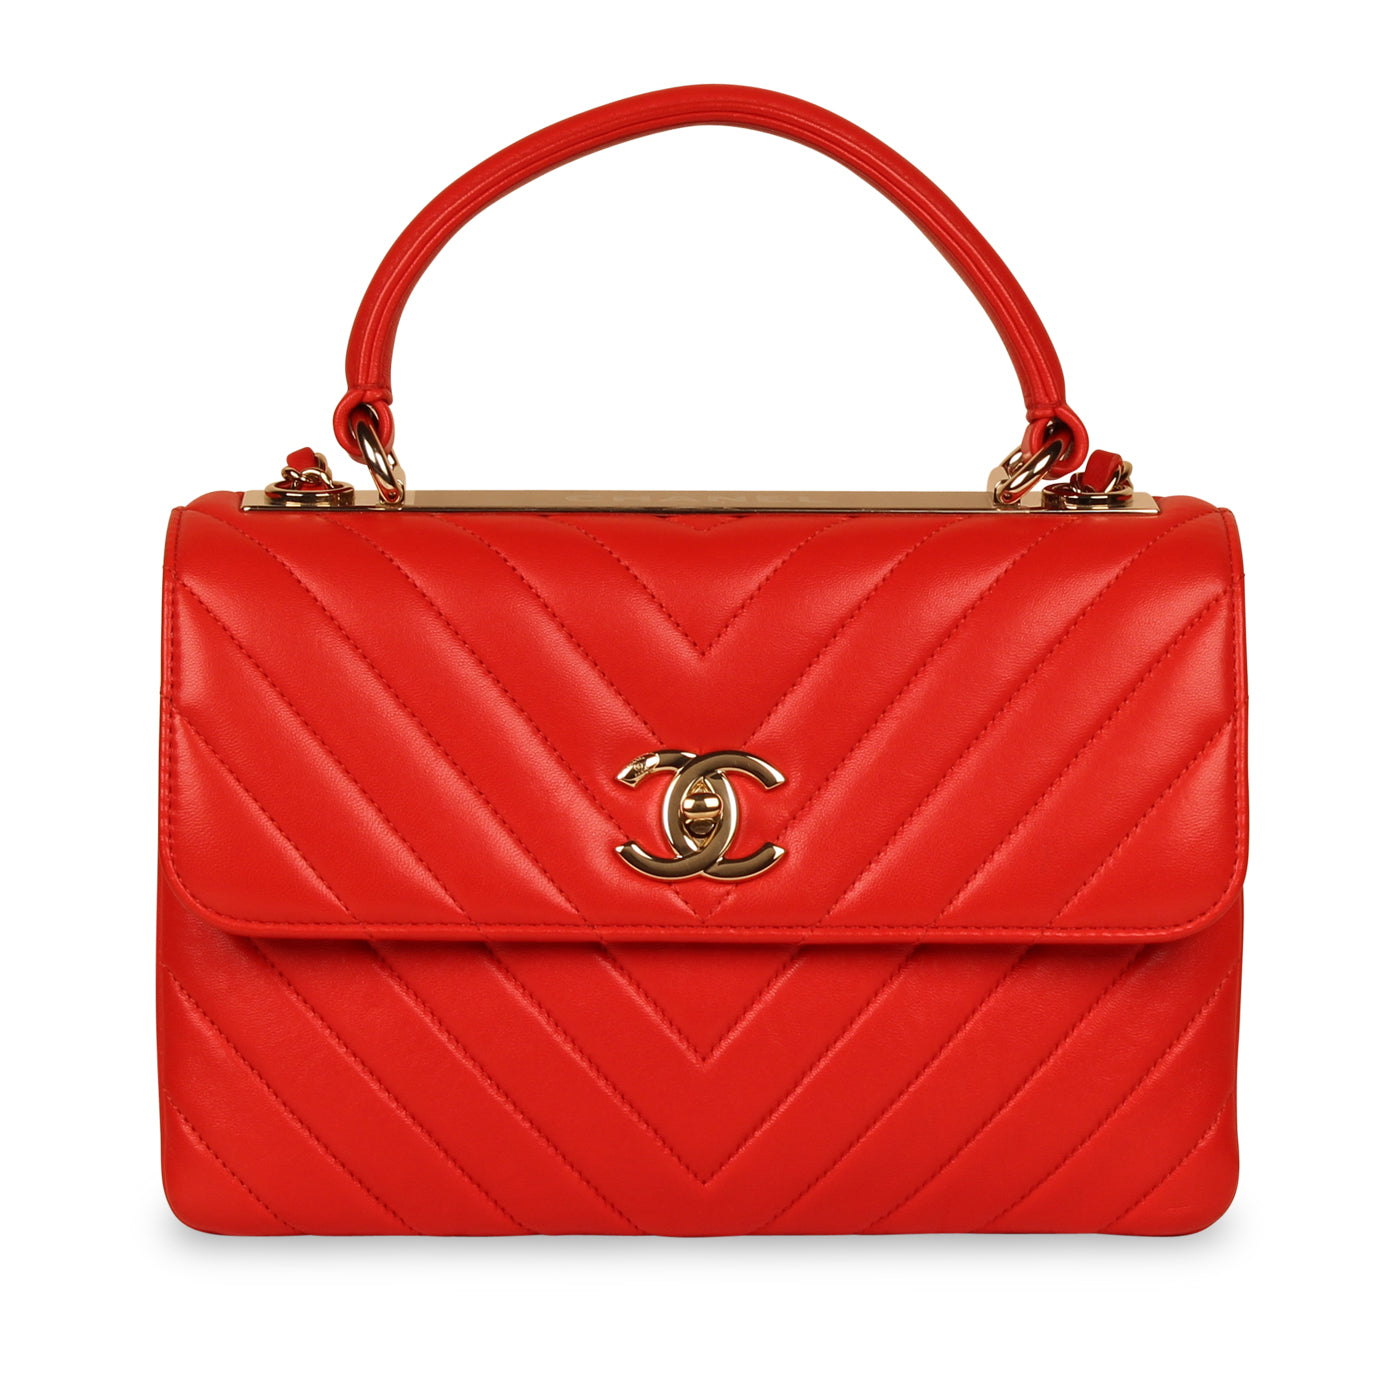 CHANEL, Bags, Chanel Red Trendy Cc Top Handle Shoulder Bag